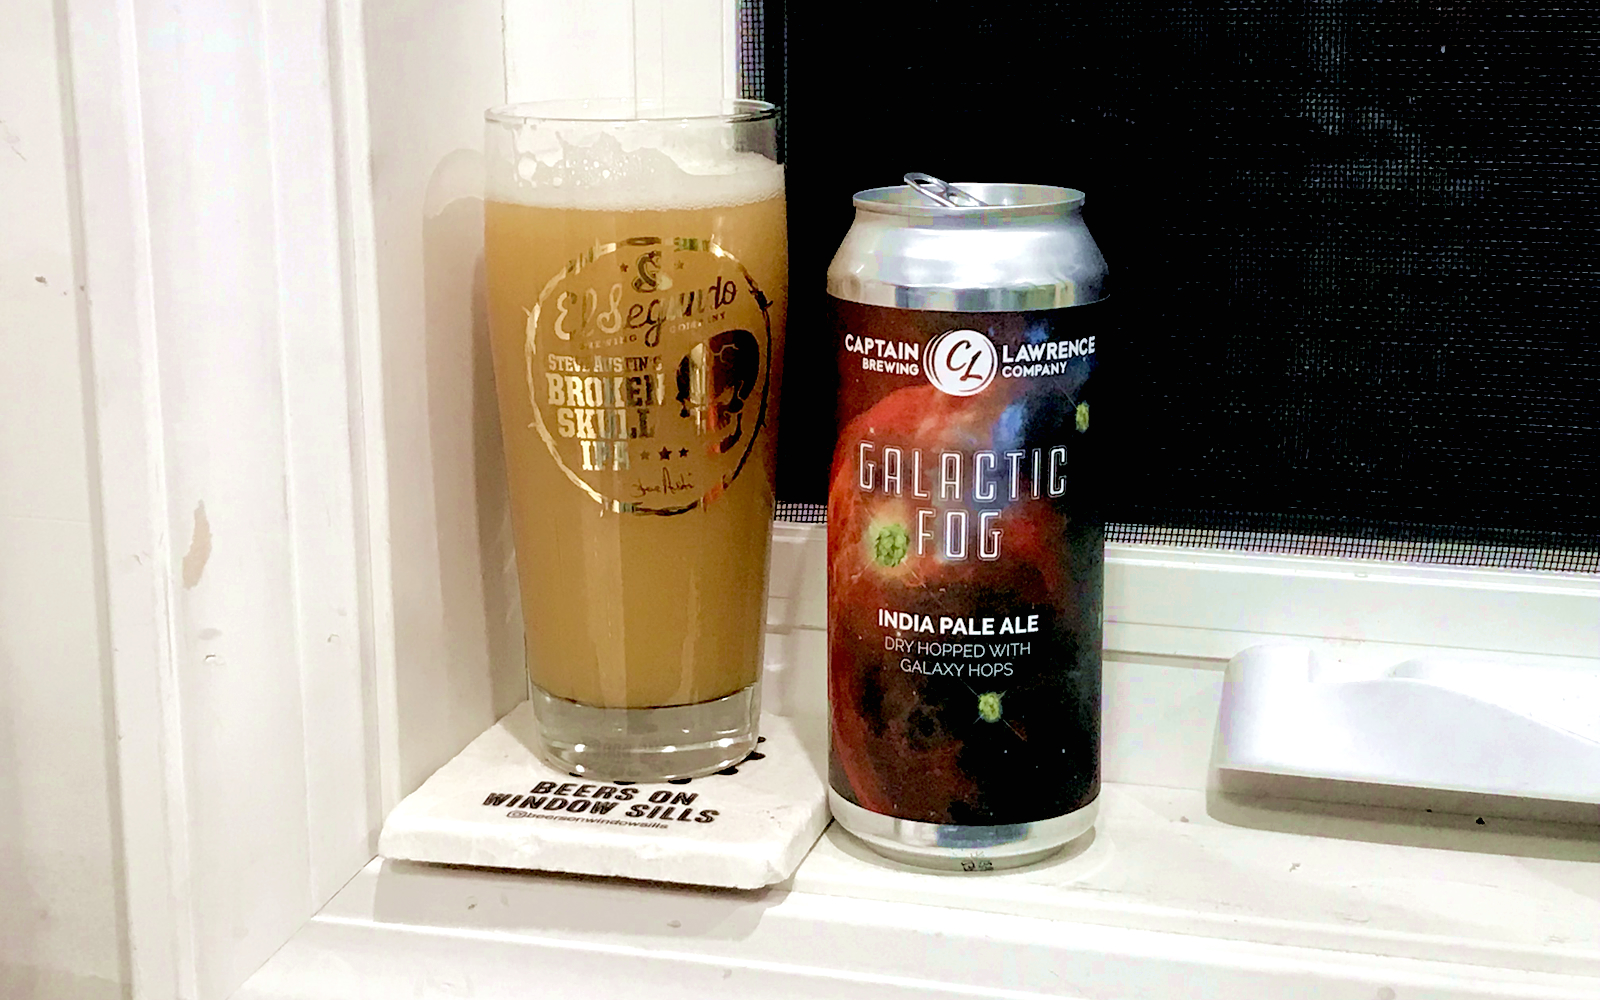 Captain Lawrence Brewing Company: Galactic Fog